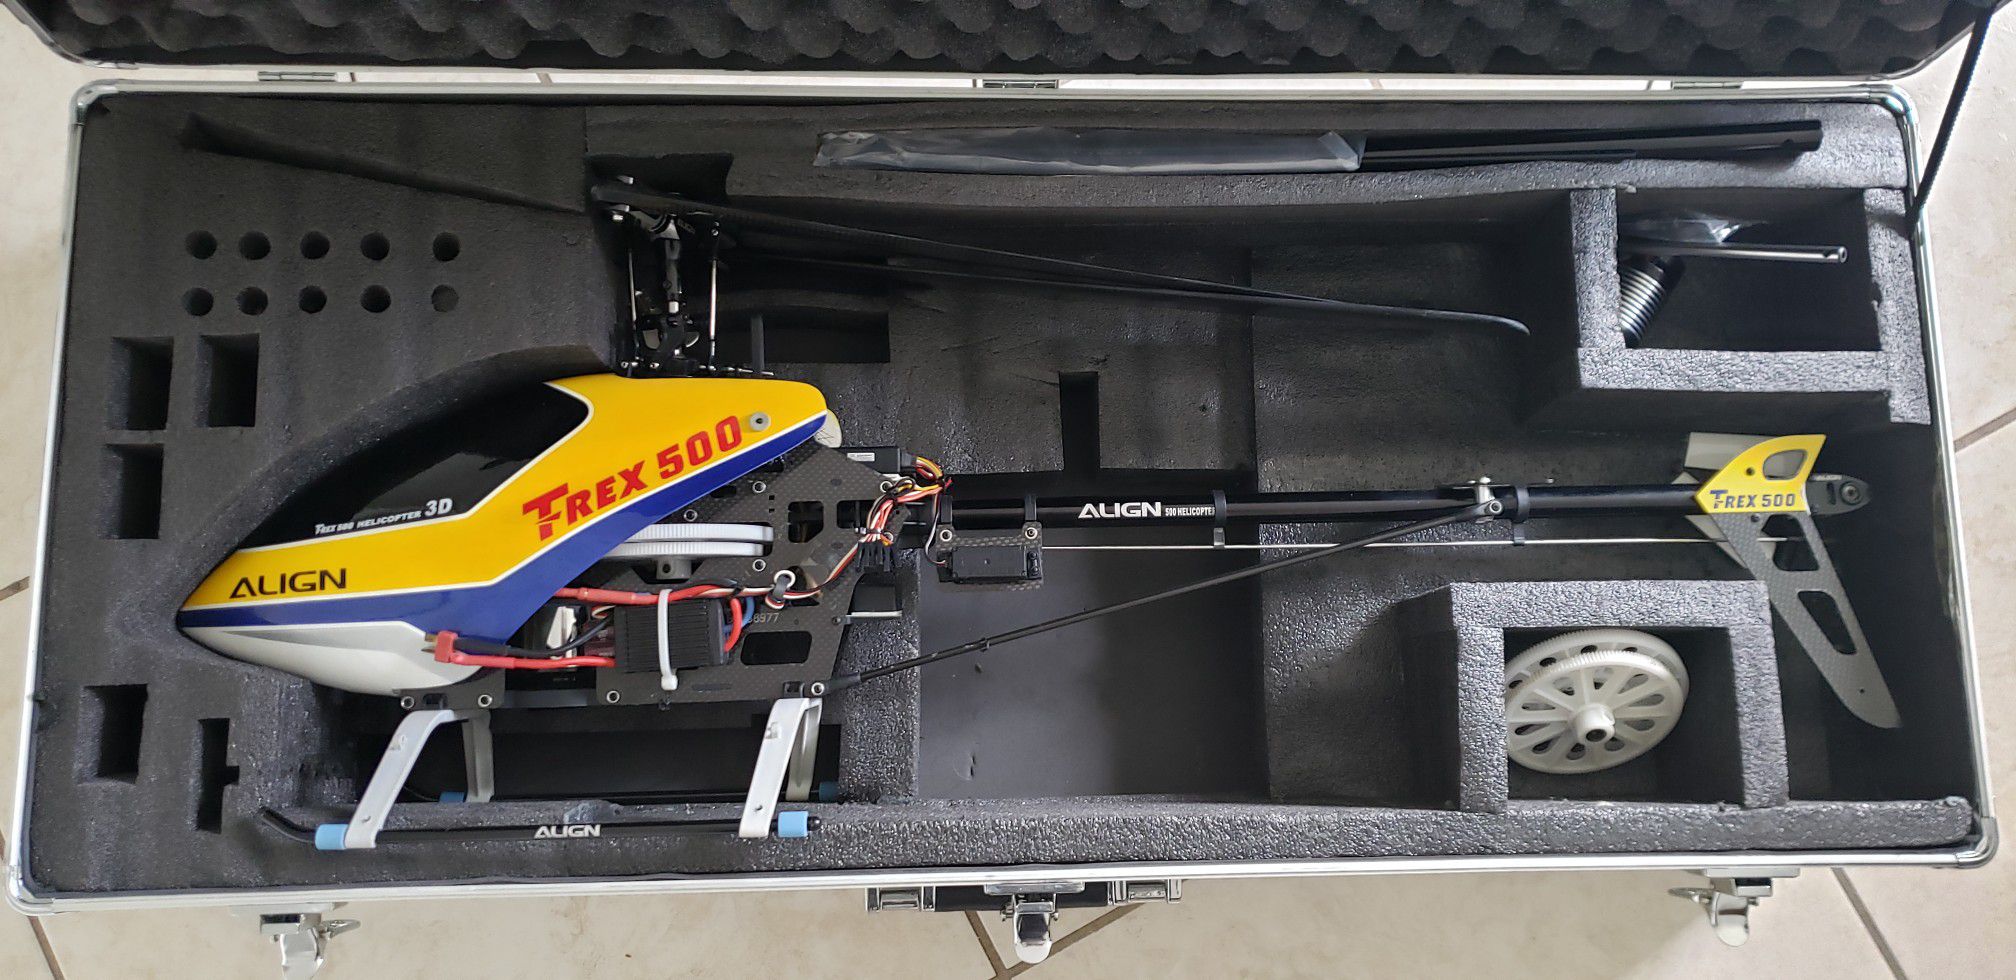 Align Trex 500 with case helicopter